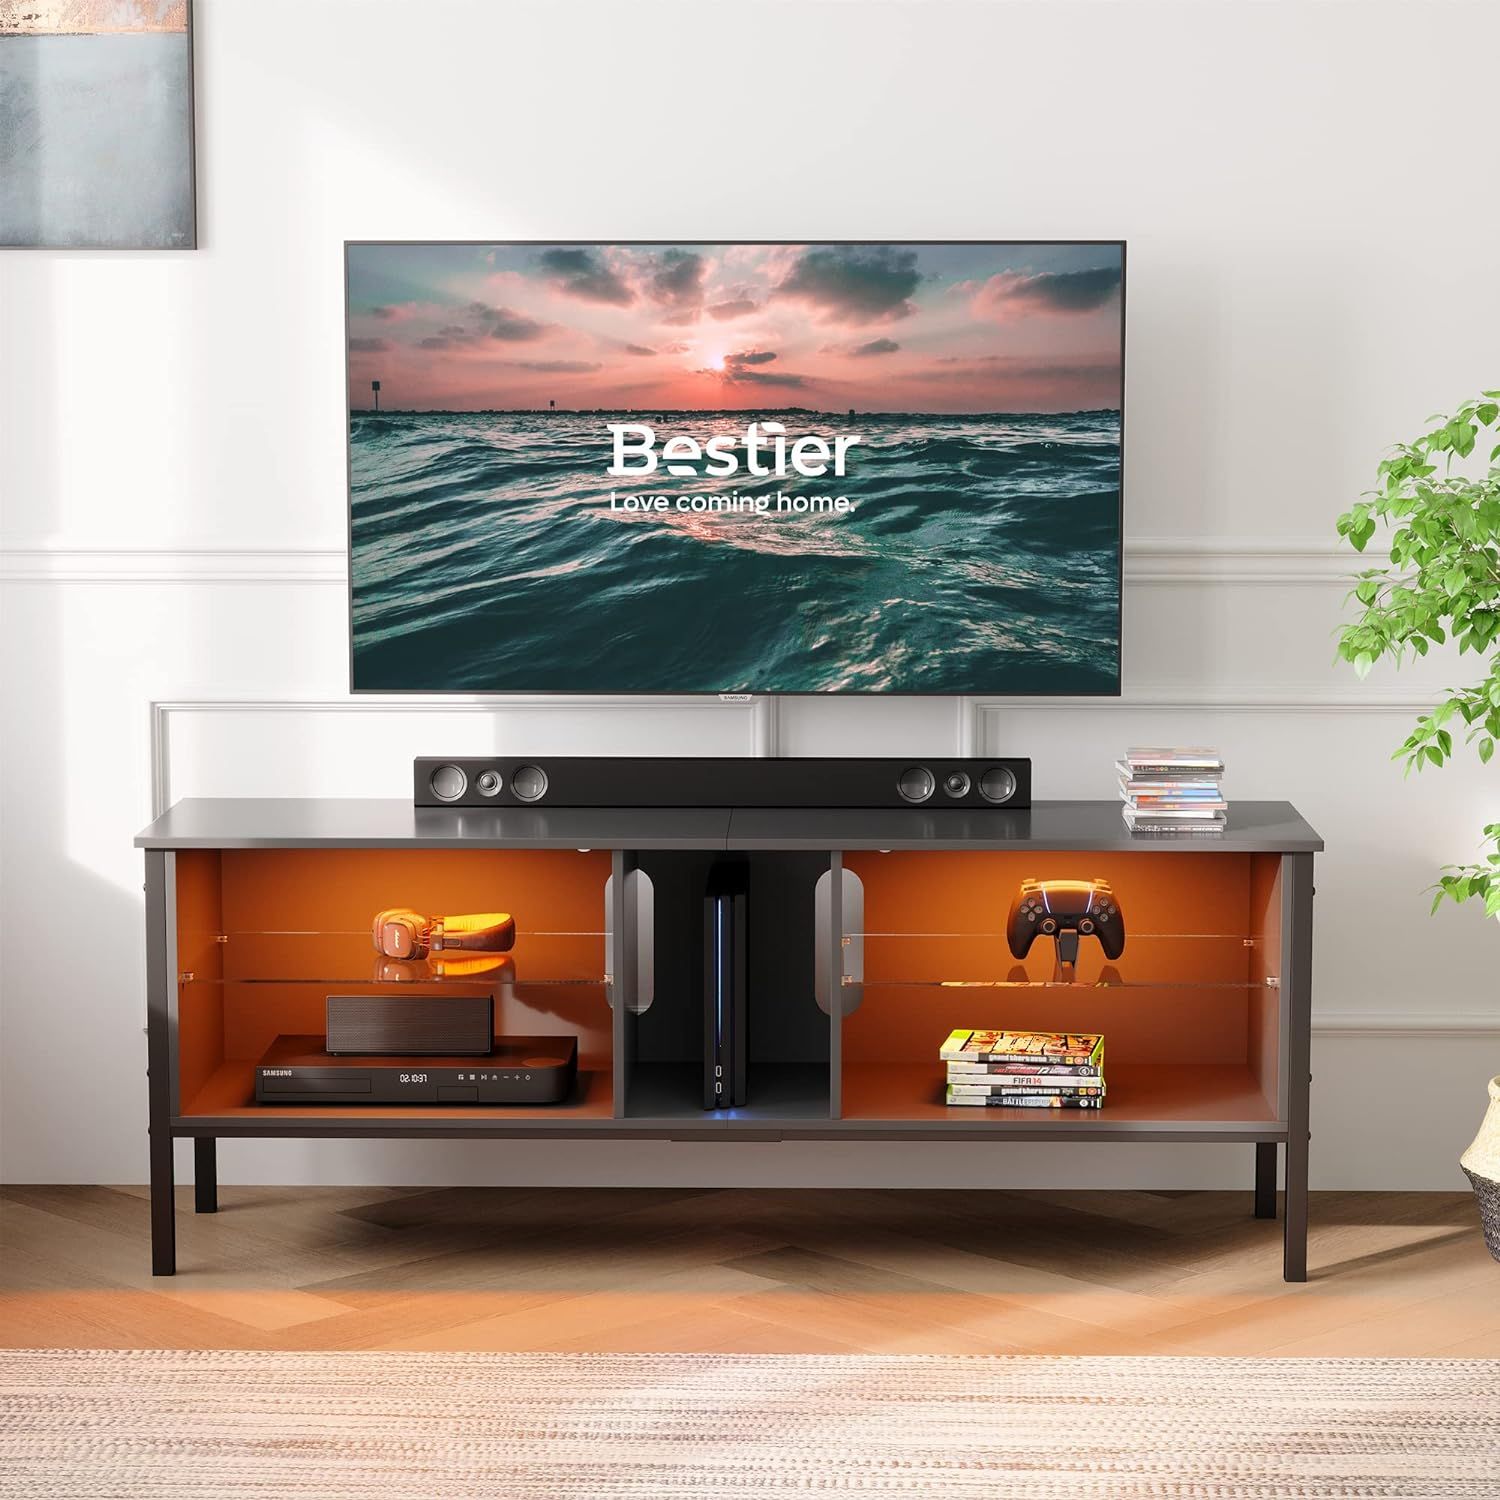 Bestier Tv Stand For 70 Inch Tv, Large Gaming Nepal | Ubuy Intended For Bestier Tv Stand For Tvs Up To 75" (View 11 of 15)